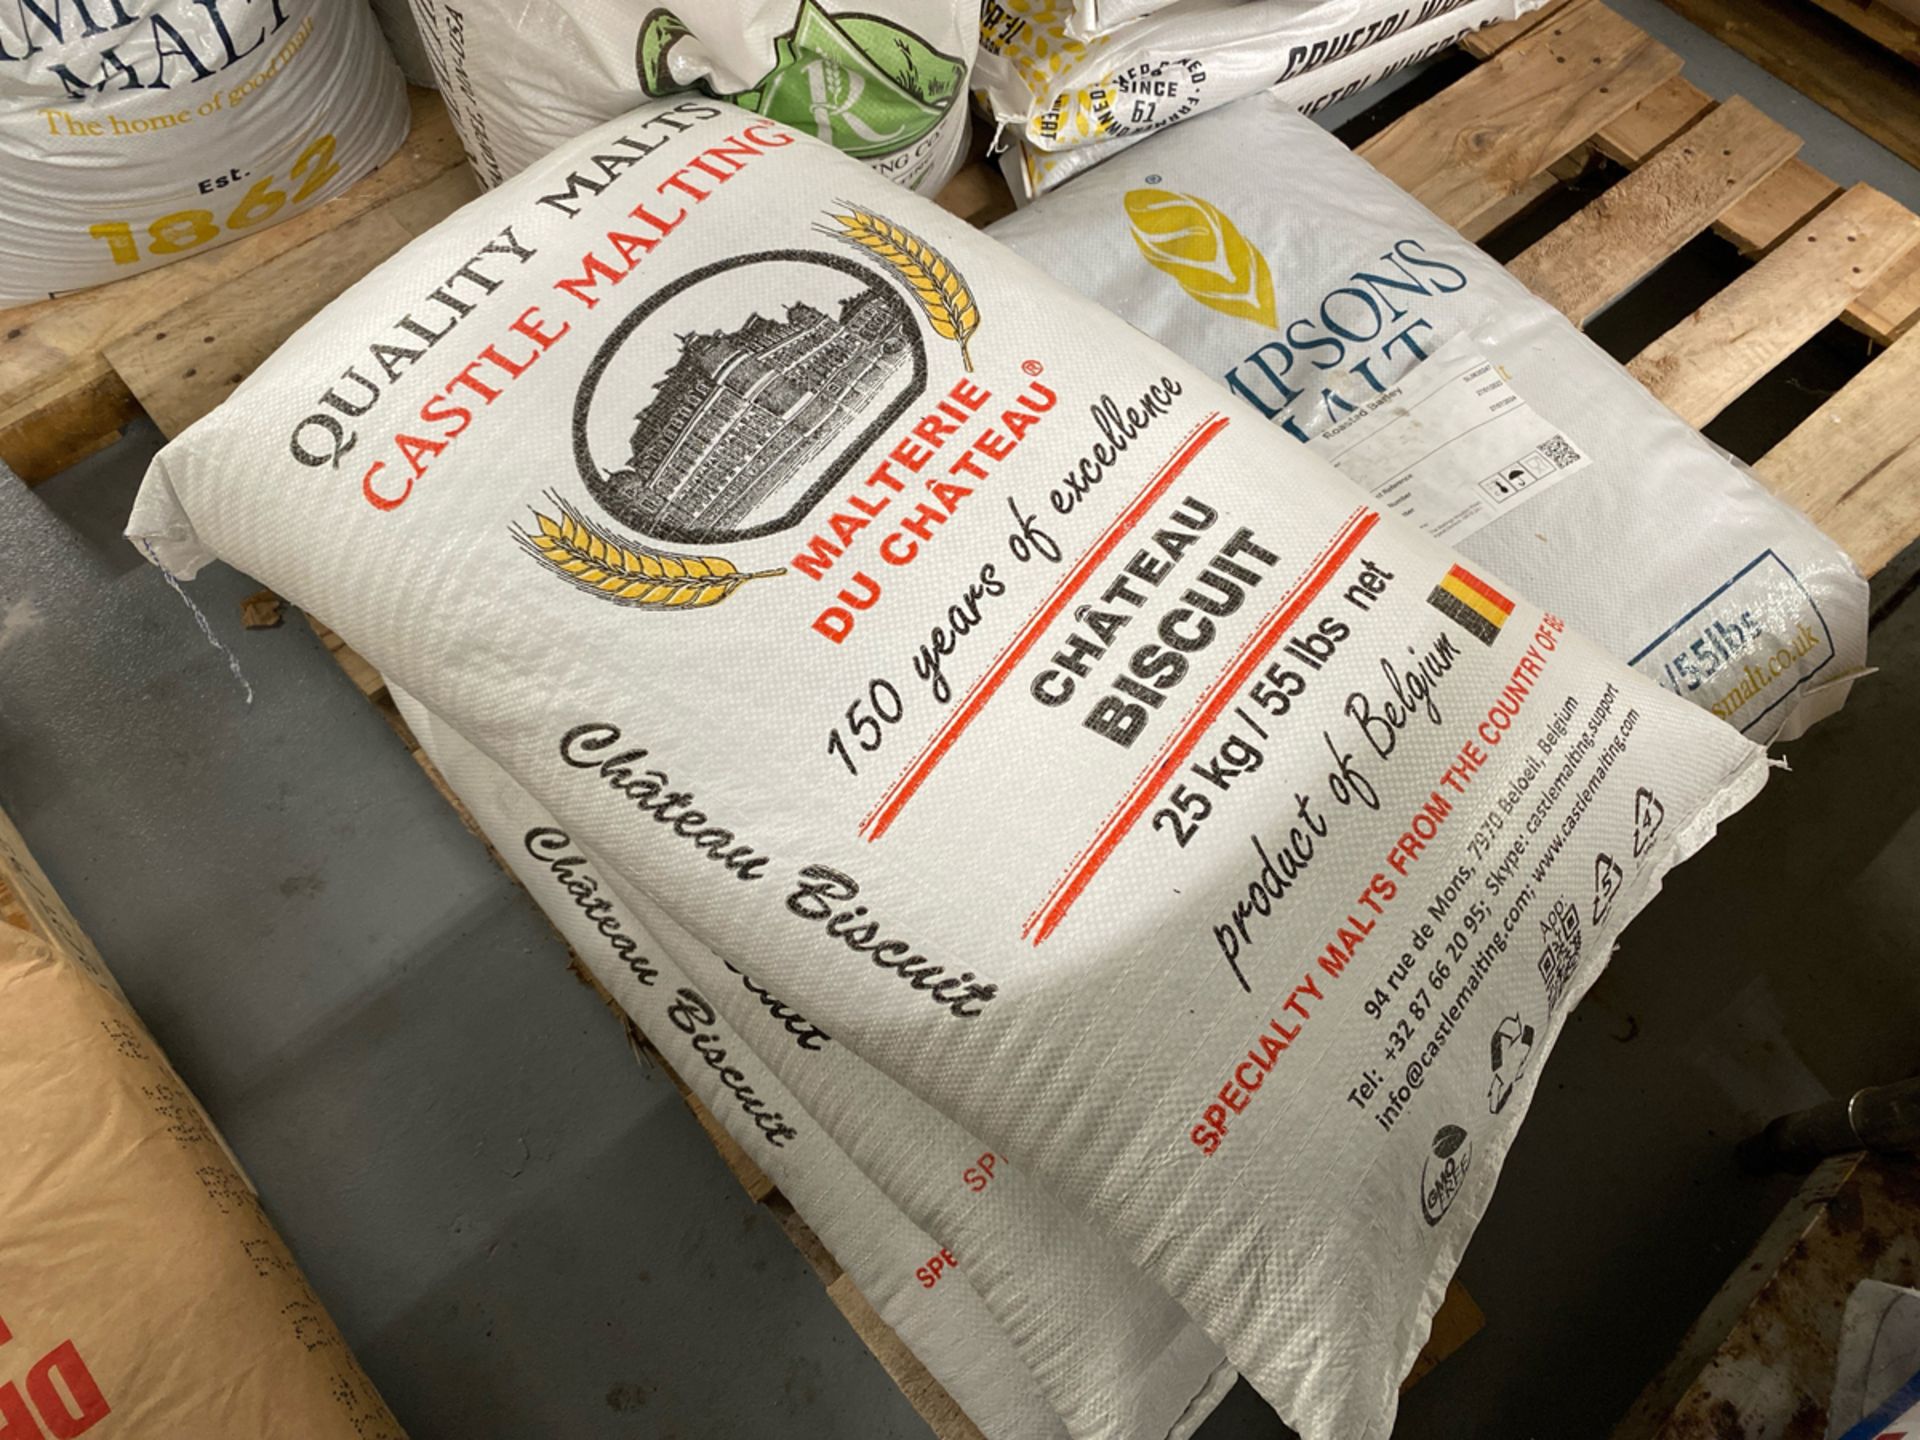 [each] 55 lb. Bags of Castle Malting Chateau Biscuit